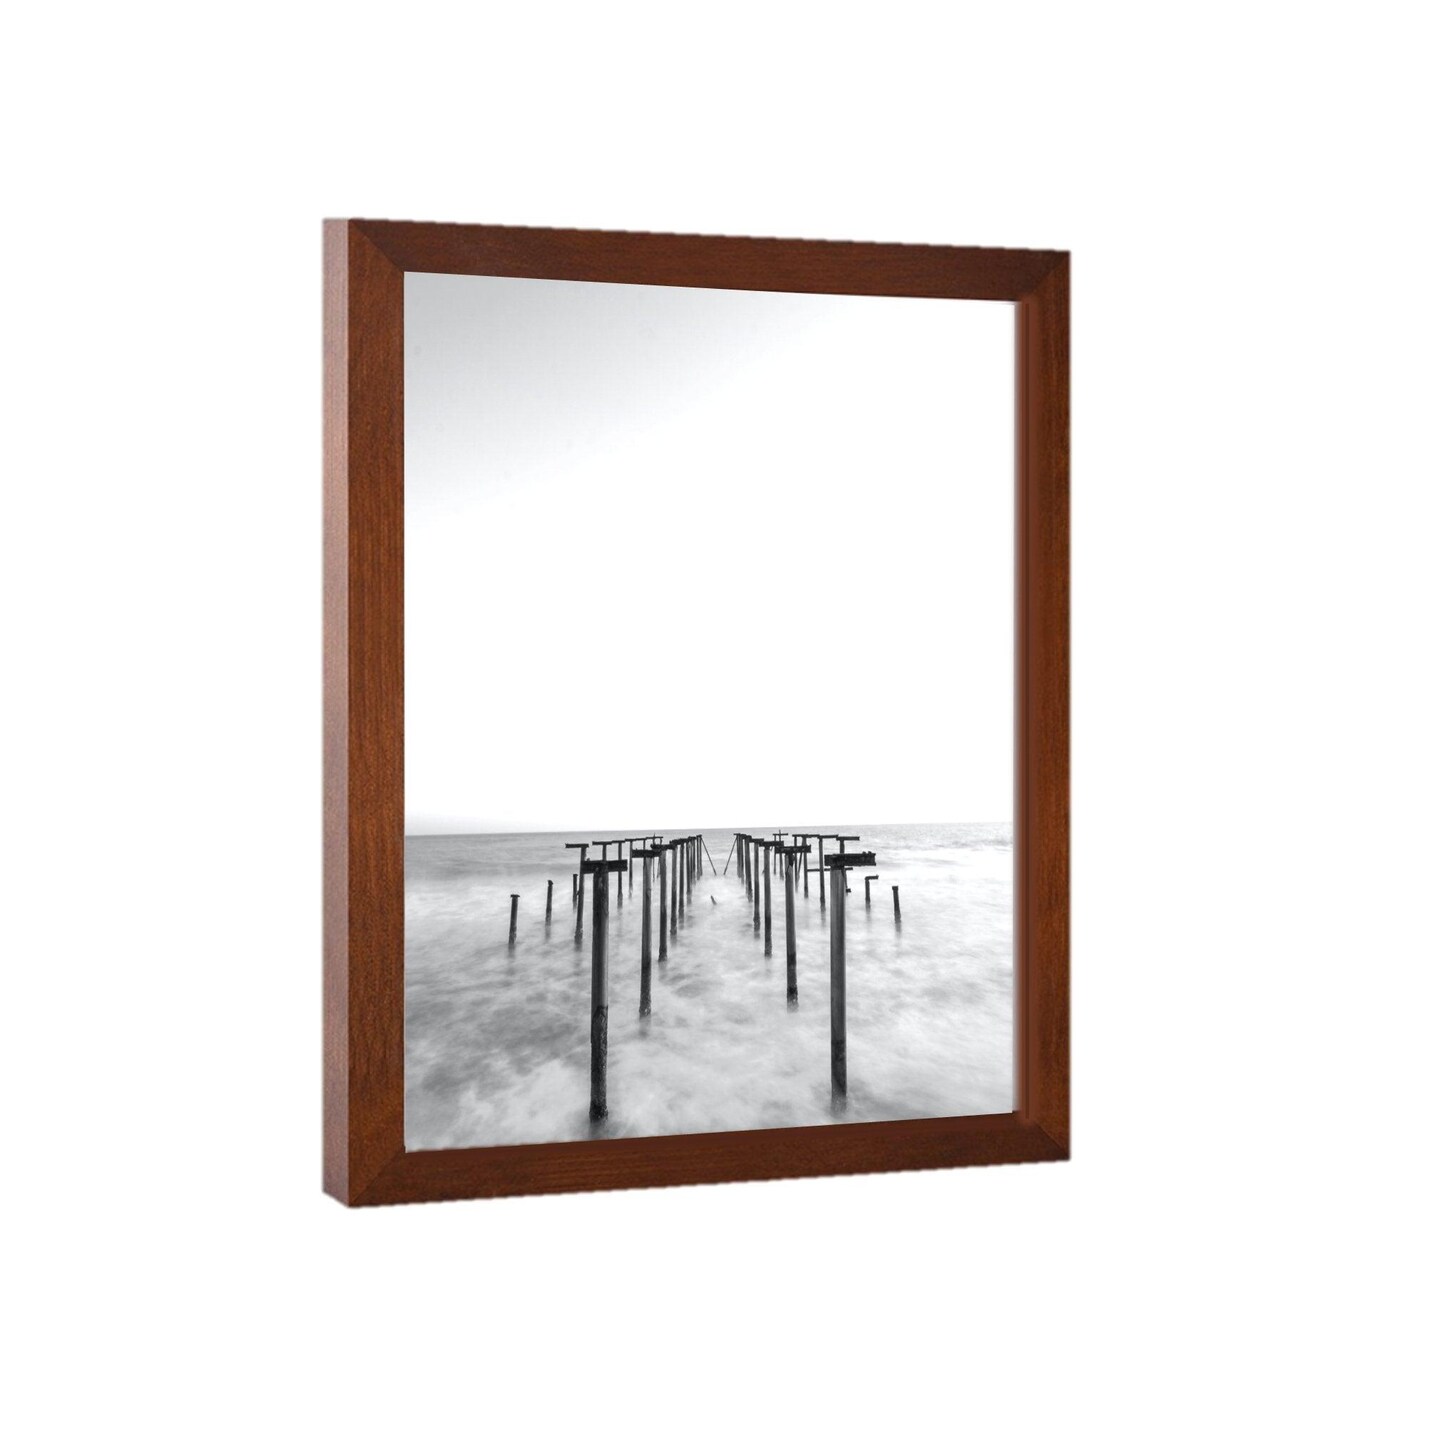 Gallery 30x40 Picture Frame Black 30x40 Frame 30 x 40 Poster Frames 30 x 40